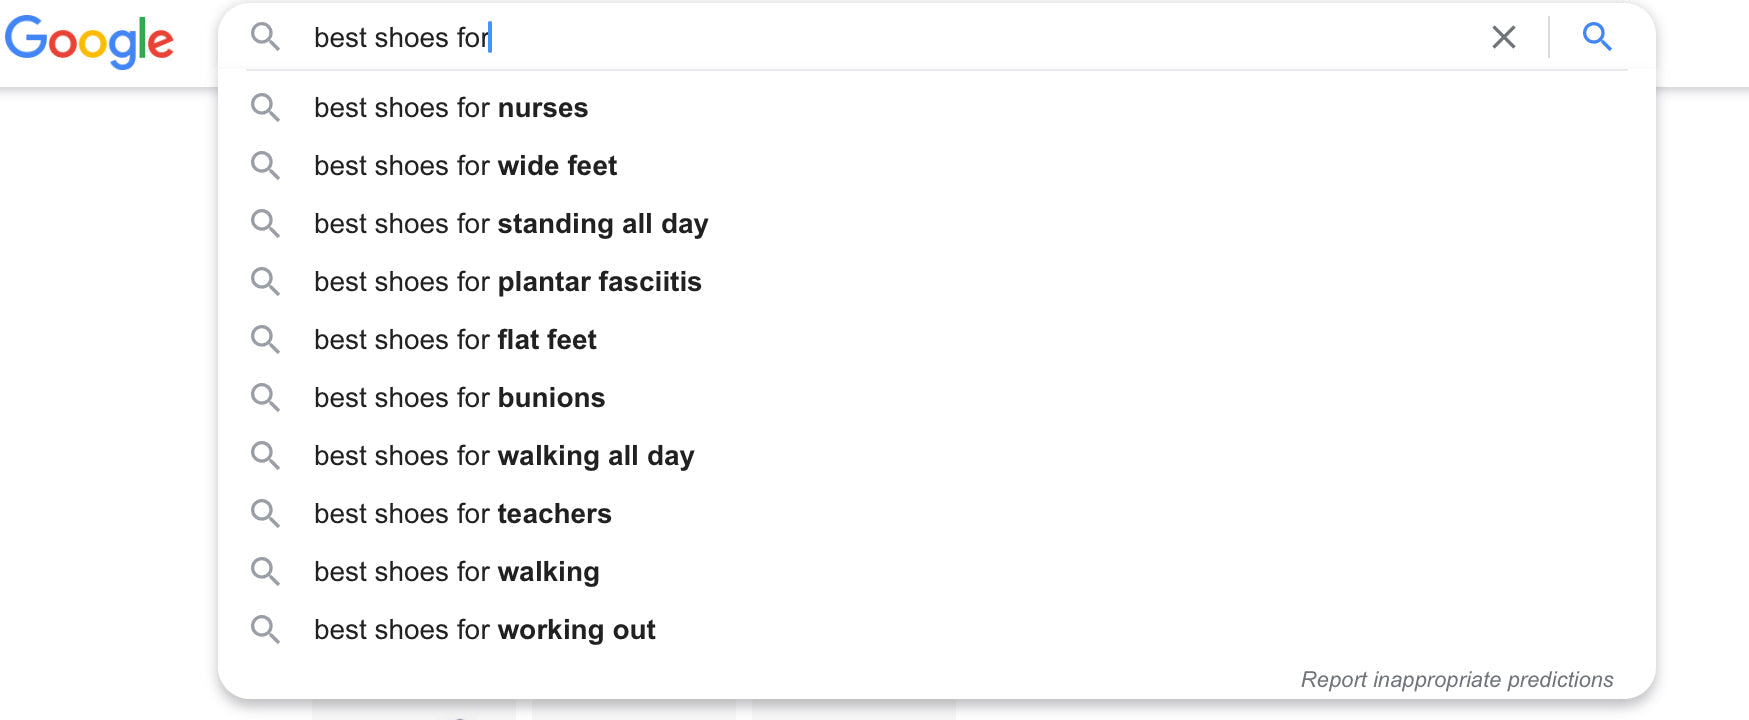 Image of a Google search autocomplete querying “best shoes for”